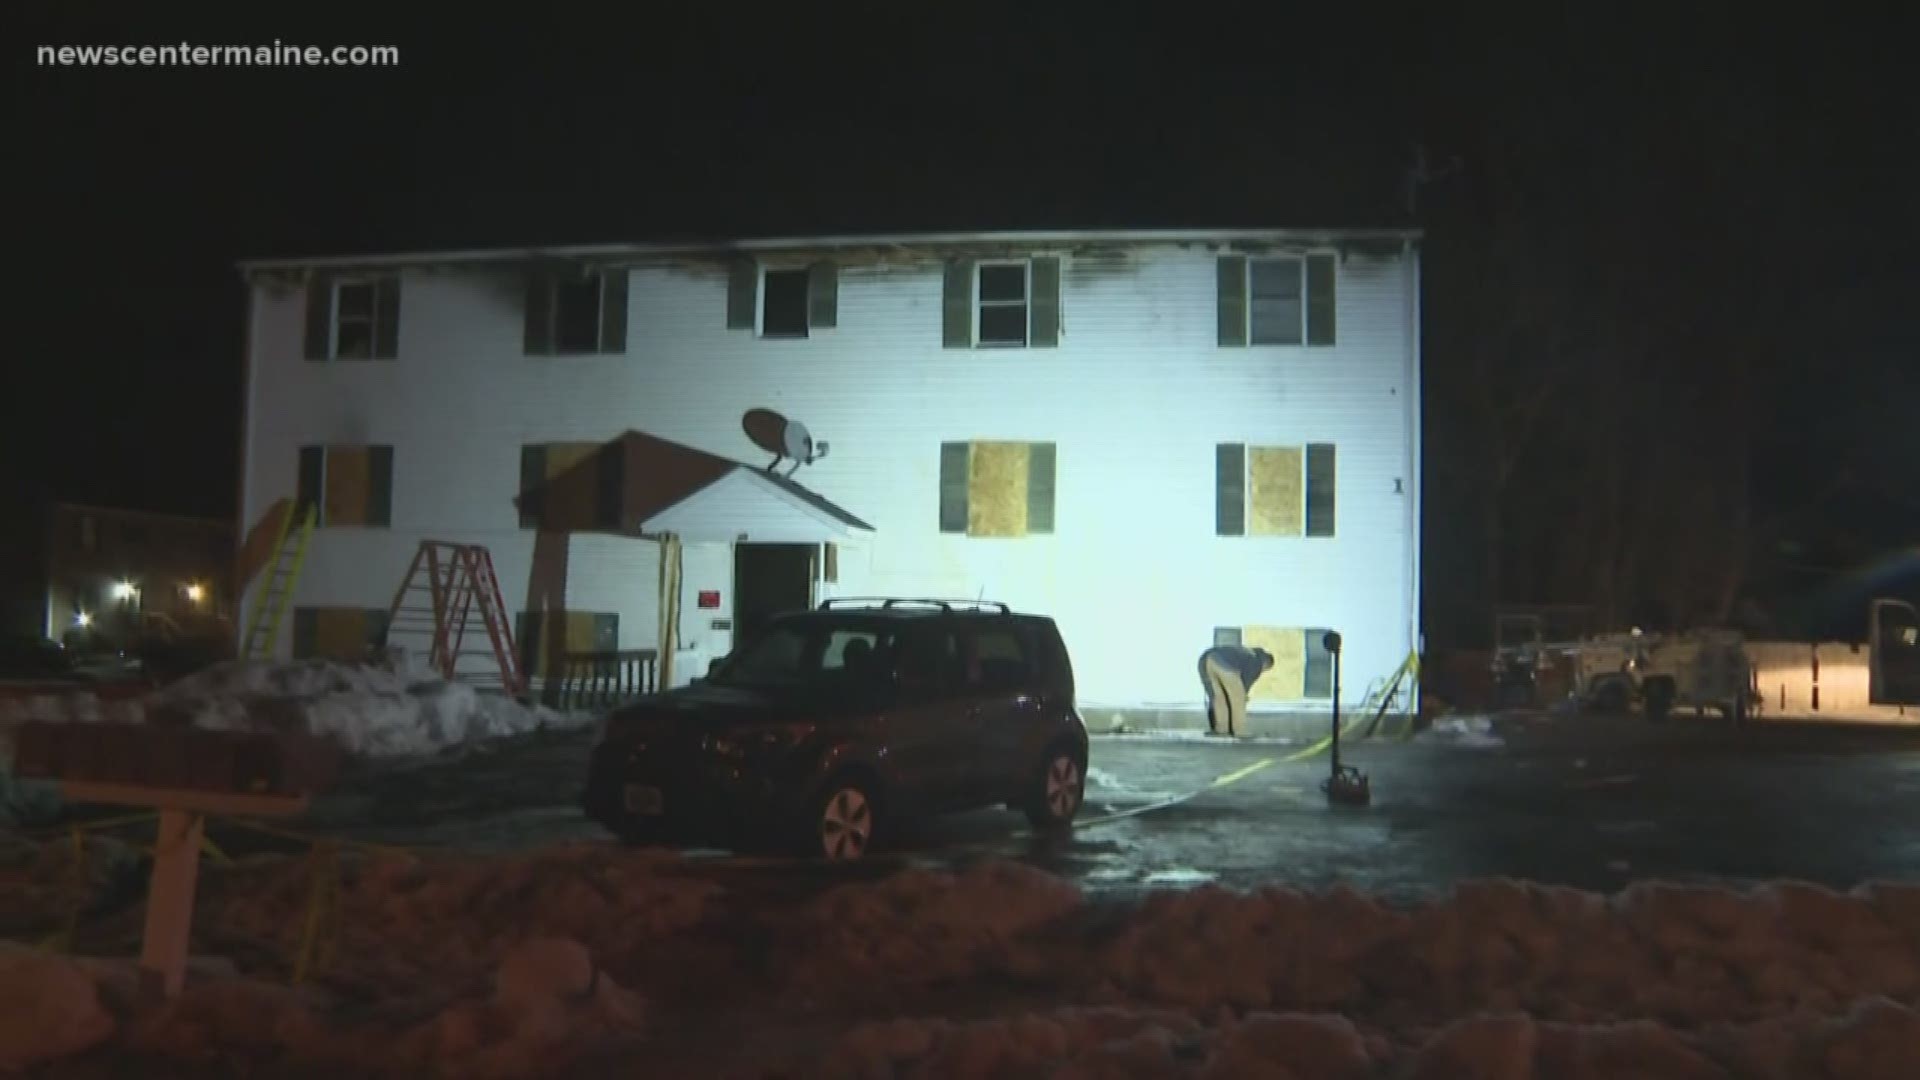 Continuing coverage of the apartment fire in Berwick that killed one firefighter.